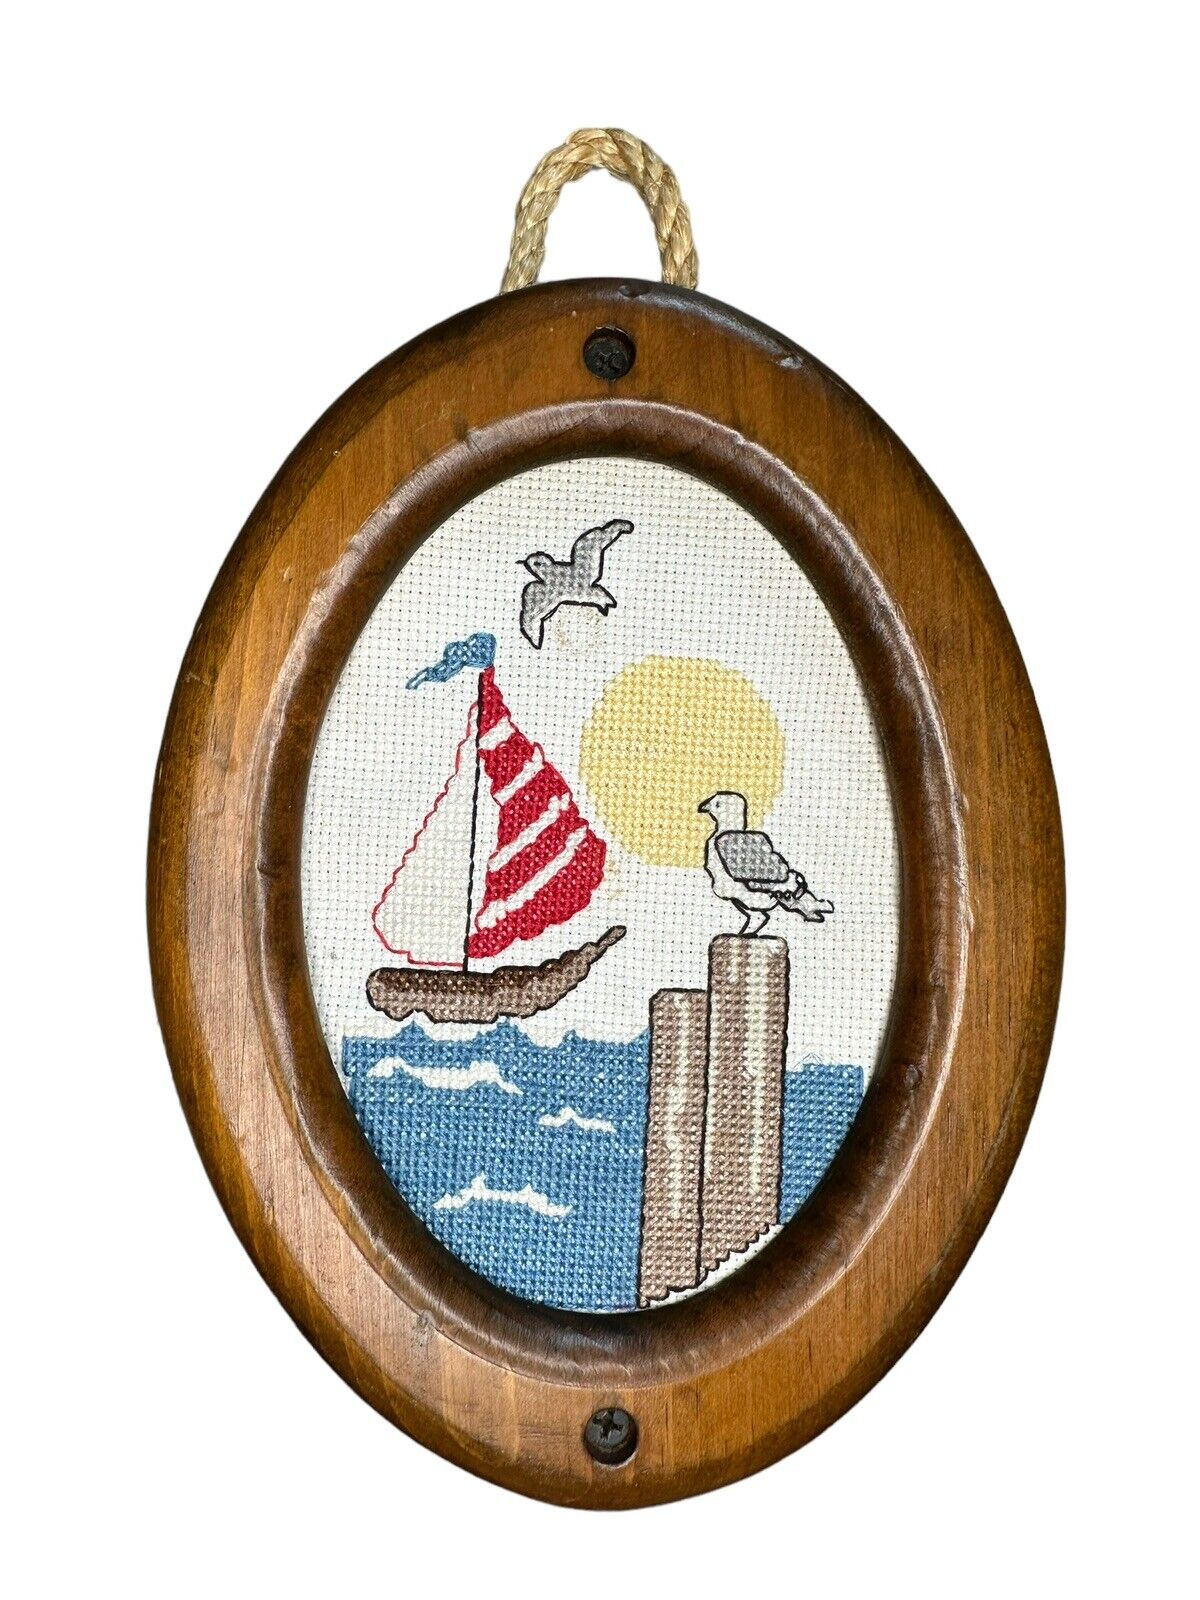 Vintage Handmade Cross-Stitched Nautical Decor Wall Hanging, Traditional Sailor